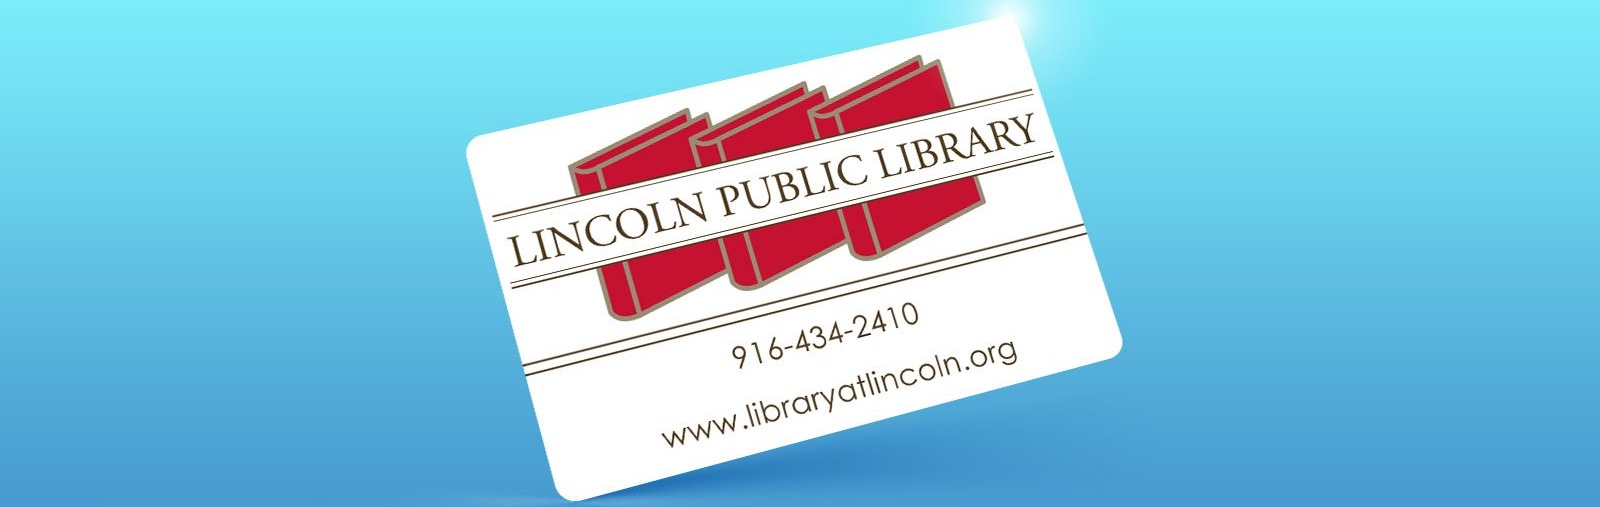 Lincoln Public Library card in front of blue background